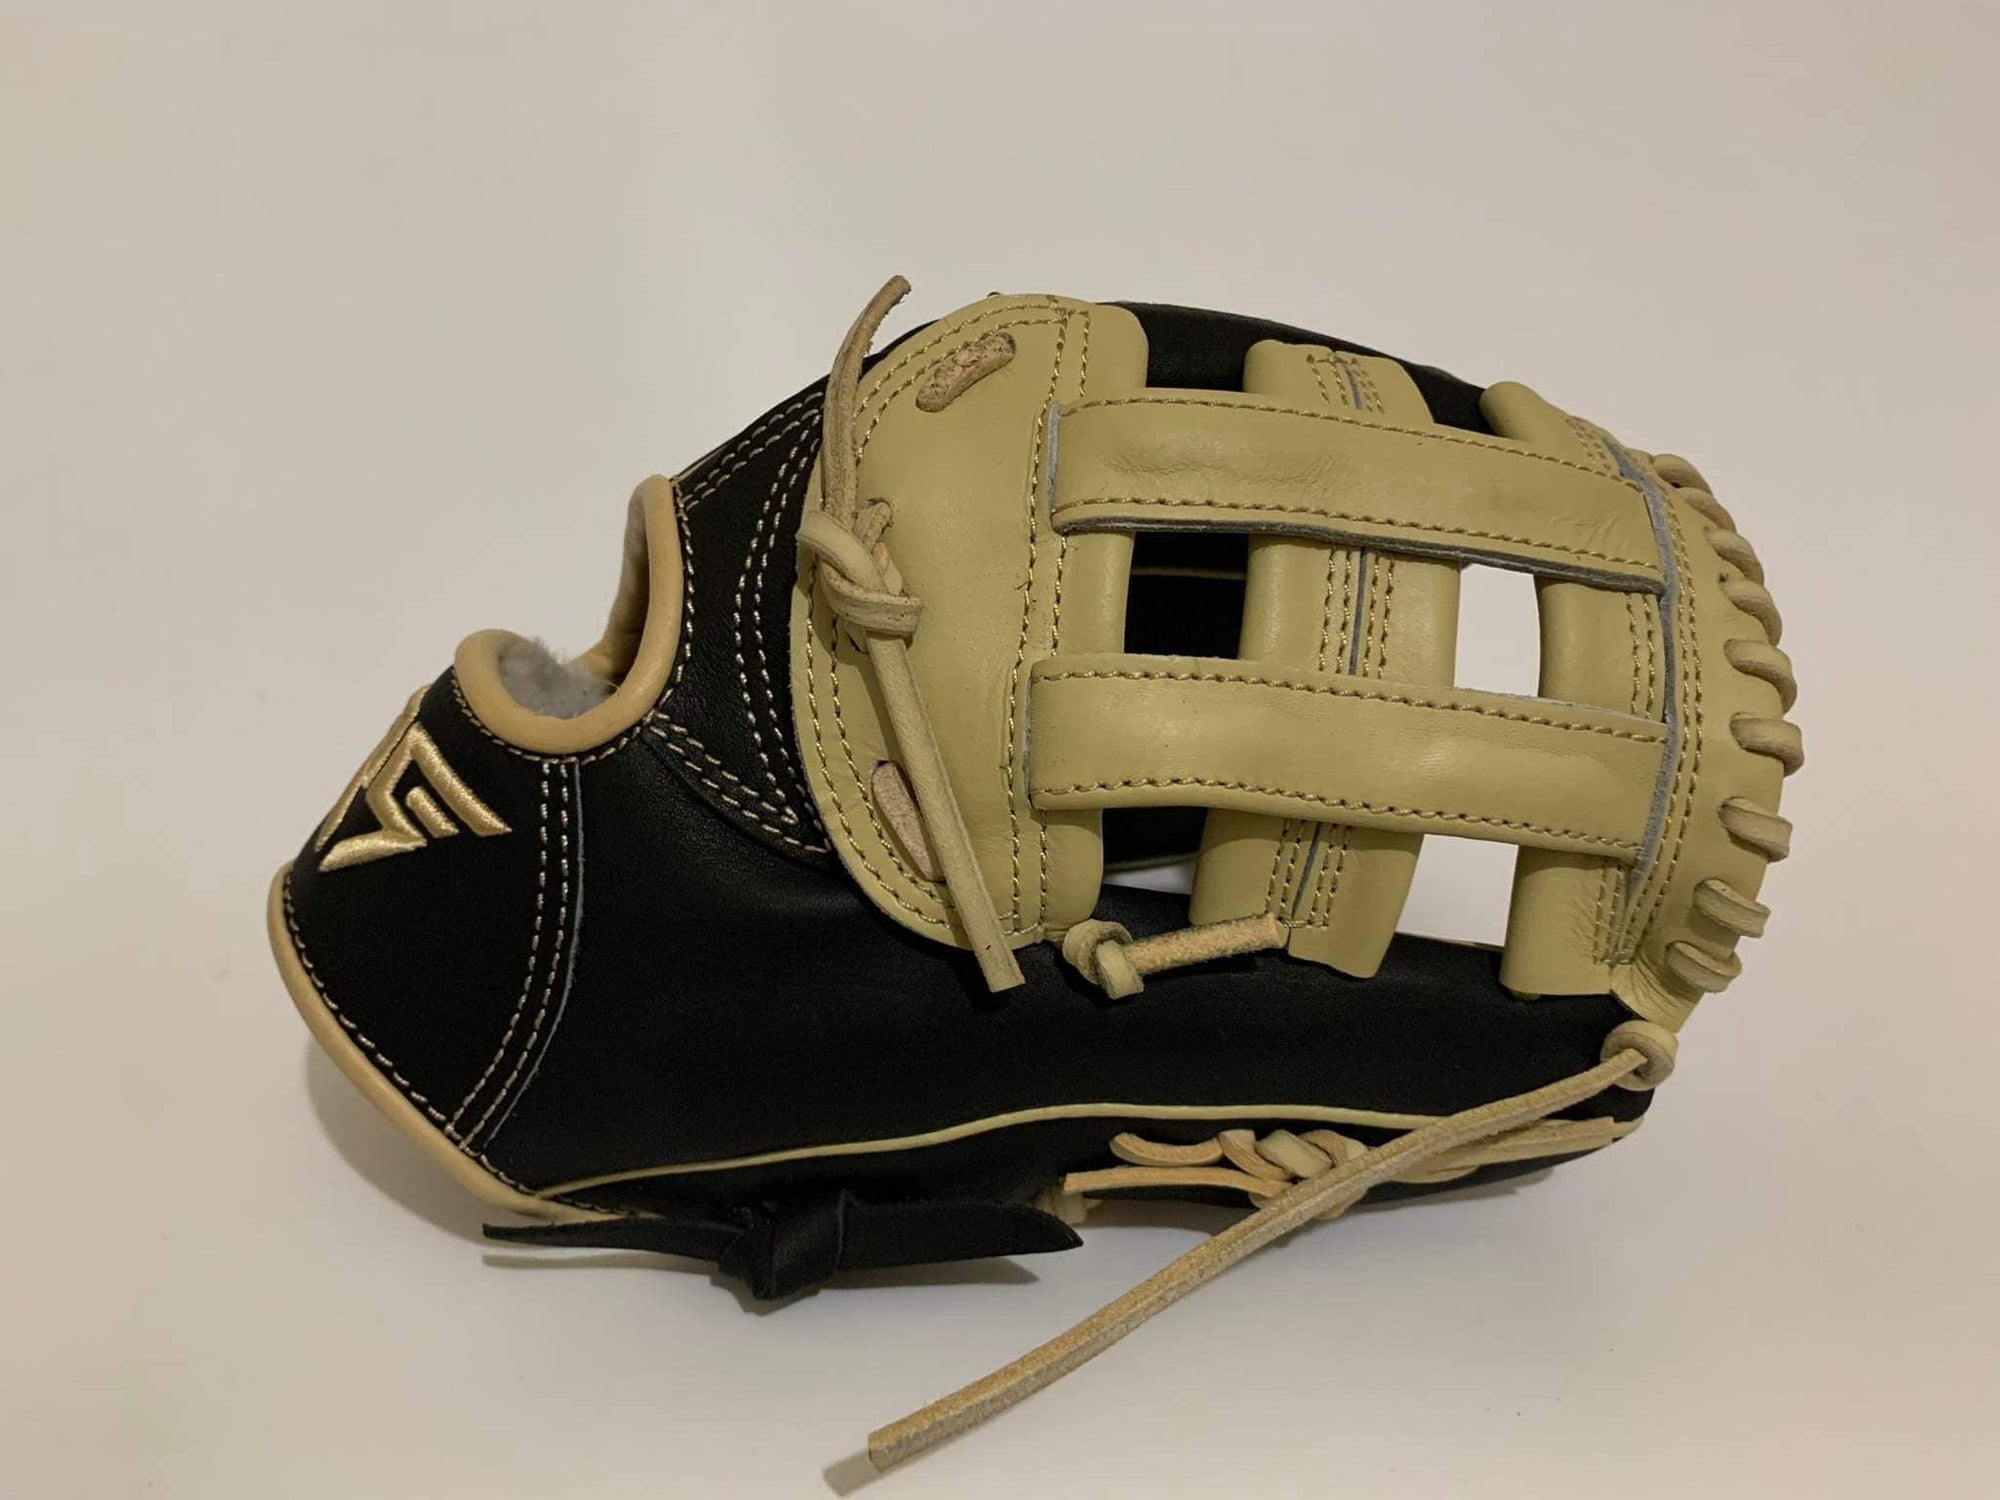 3 Reasons Custom Softball Gloves Are Worth the Investment